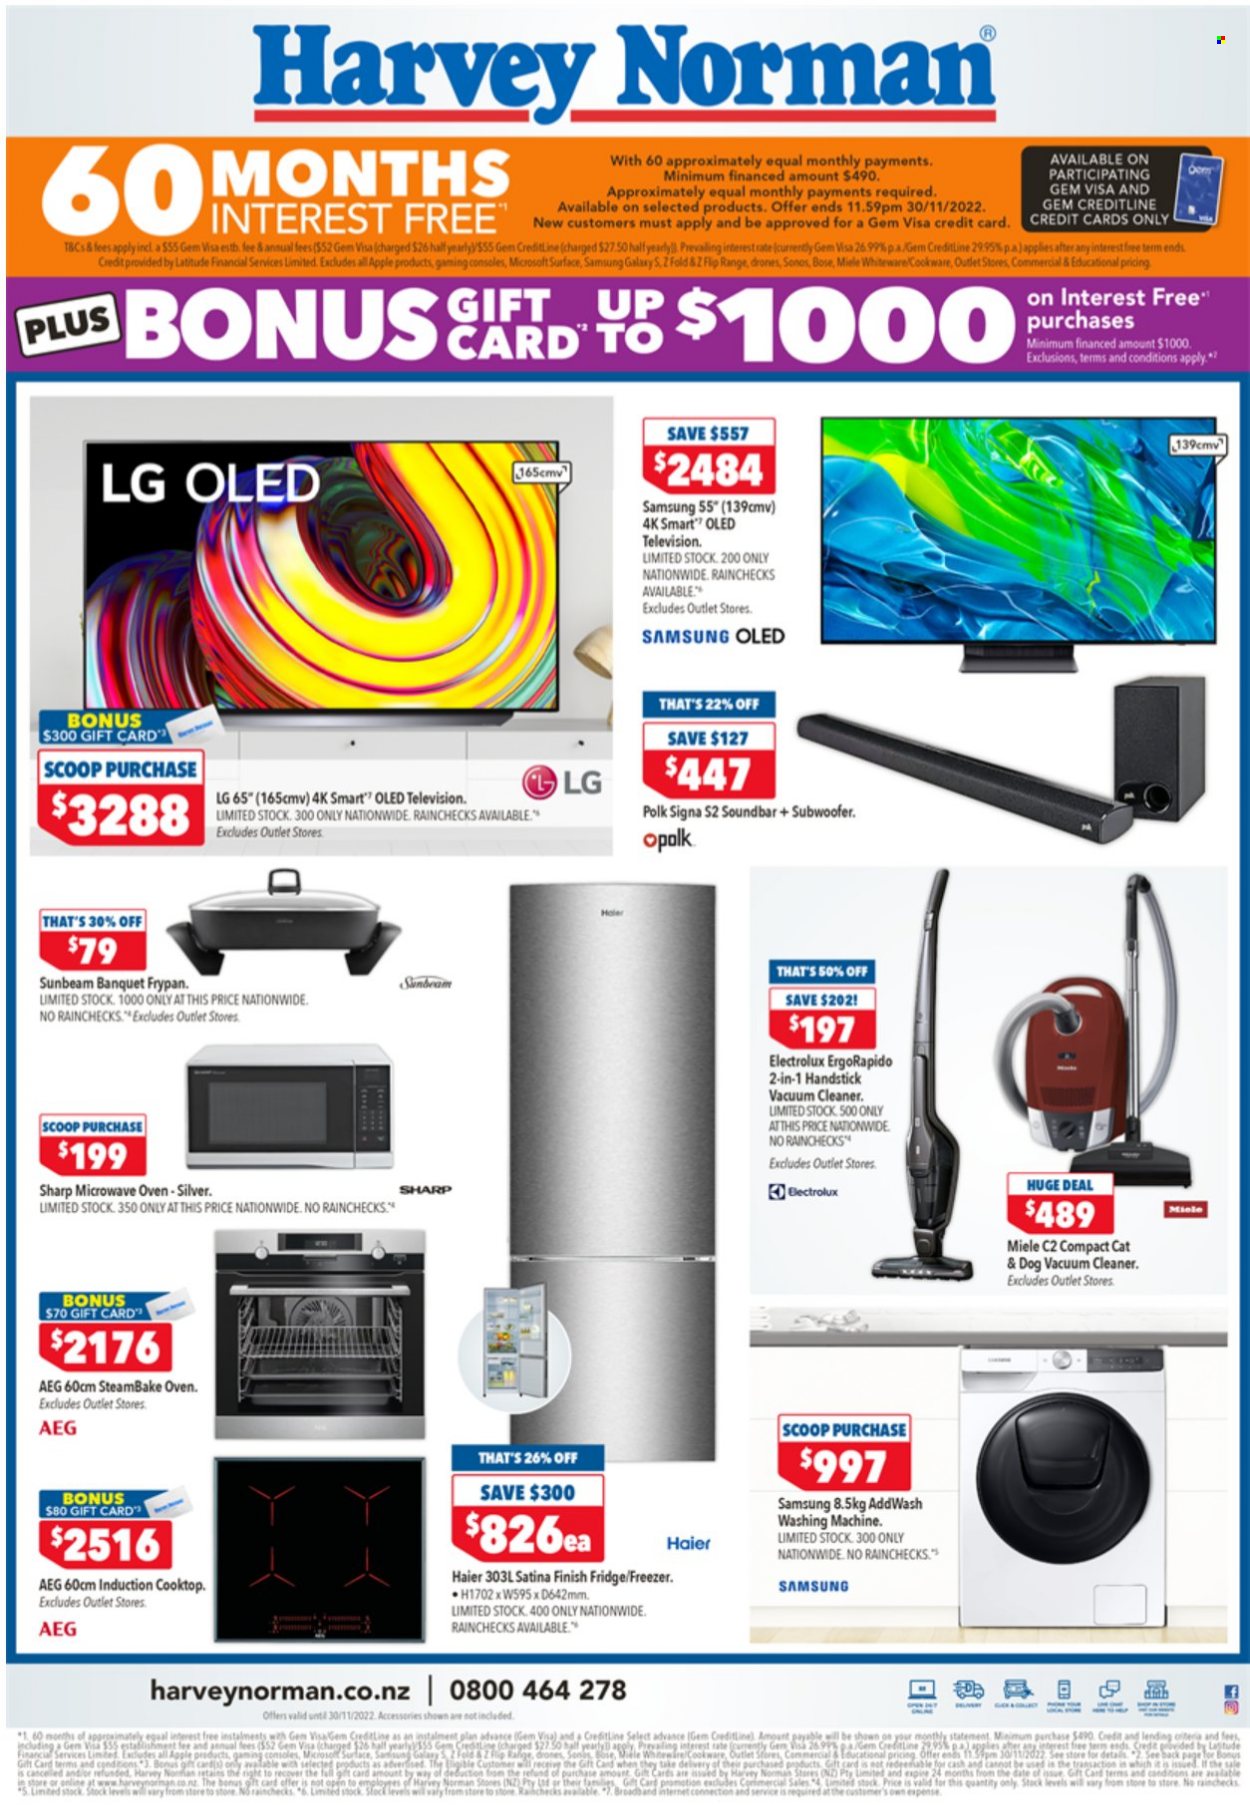 thumbnail - Harvey Norman mailer - 25.11.2022 - 27.11.2022 - Sales products - Apple, LG, Samsung Galaxy, Sharp, Sunbeam, drone, Samsung, Haier, Samsung Galaxy S, Sonos, BOSE, subwoofer, sound bar, AEG, Electrolux, Miele, freezer, refrigerator, fridge, oven, microwave, cooktop, induction cooktop, washing machine, vacuum cleaner. Page 5.